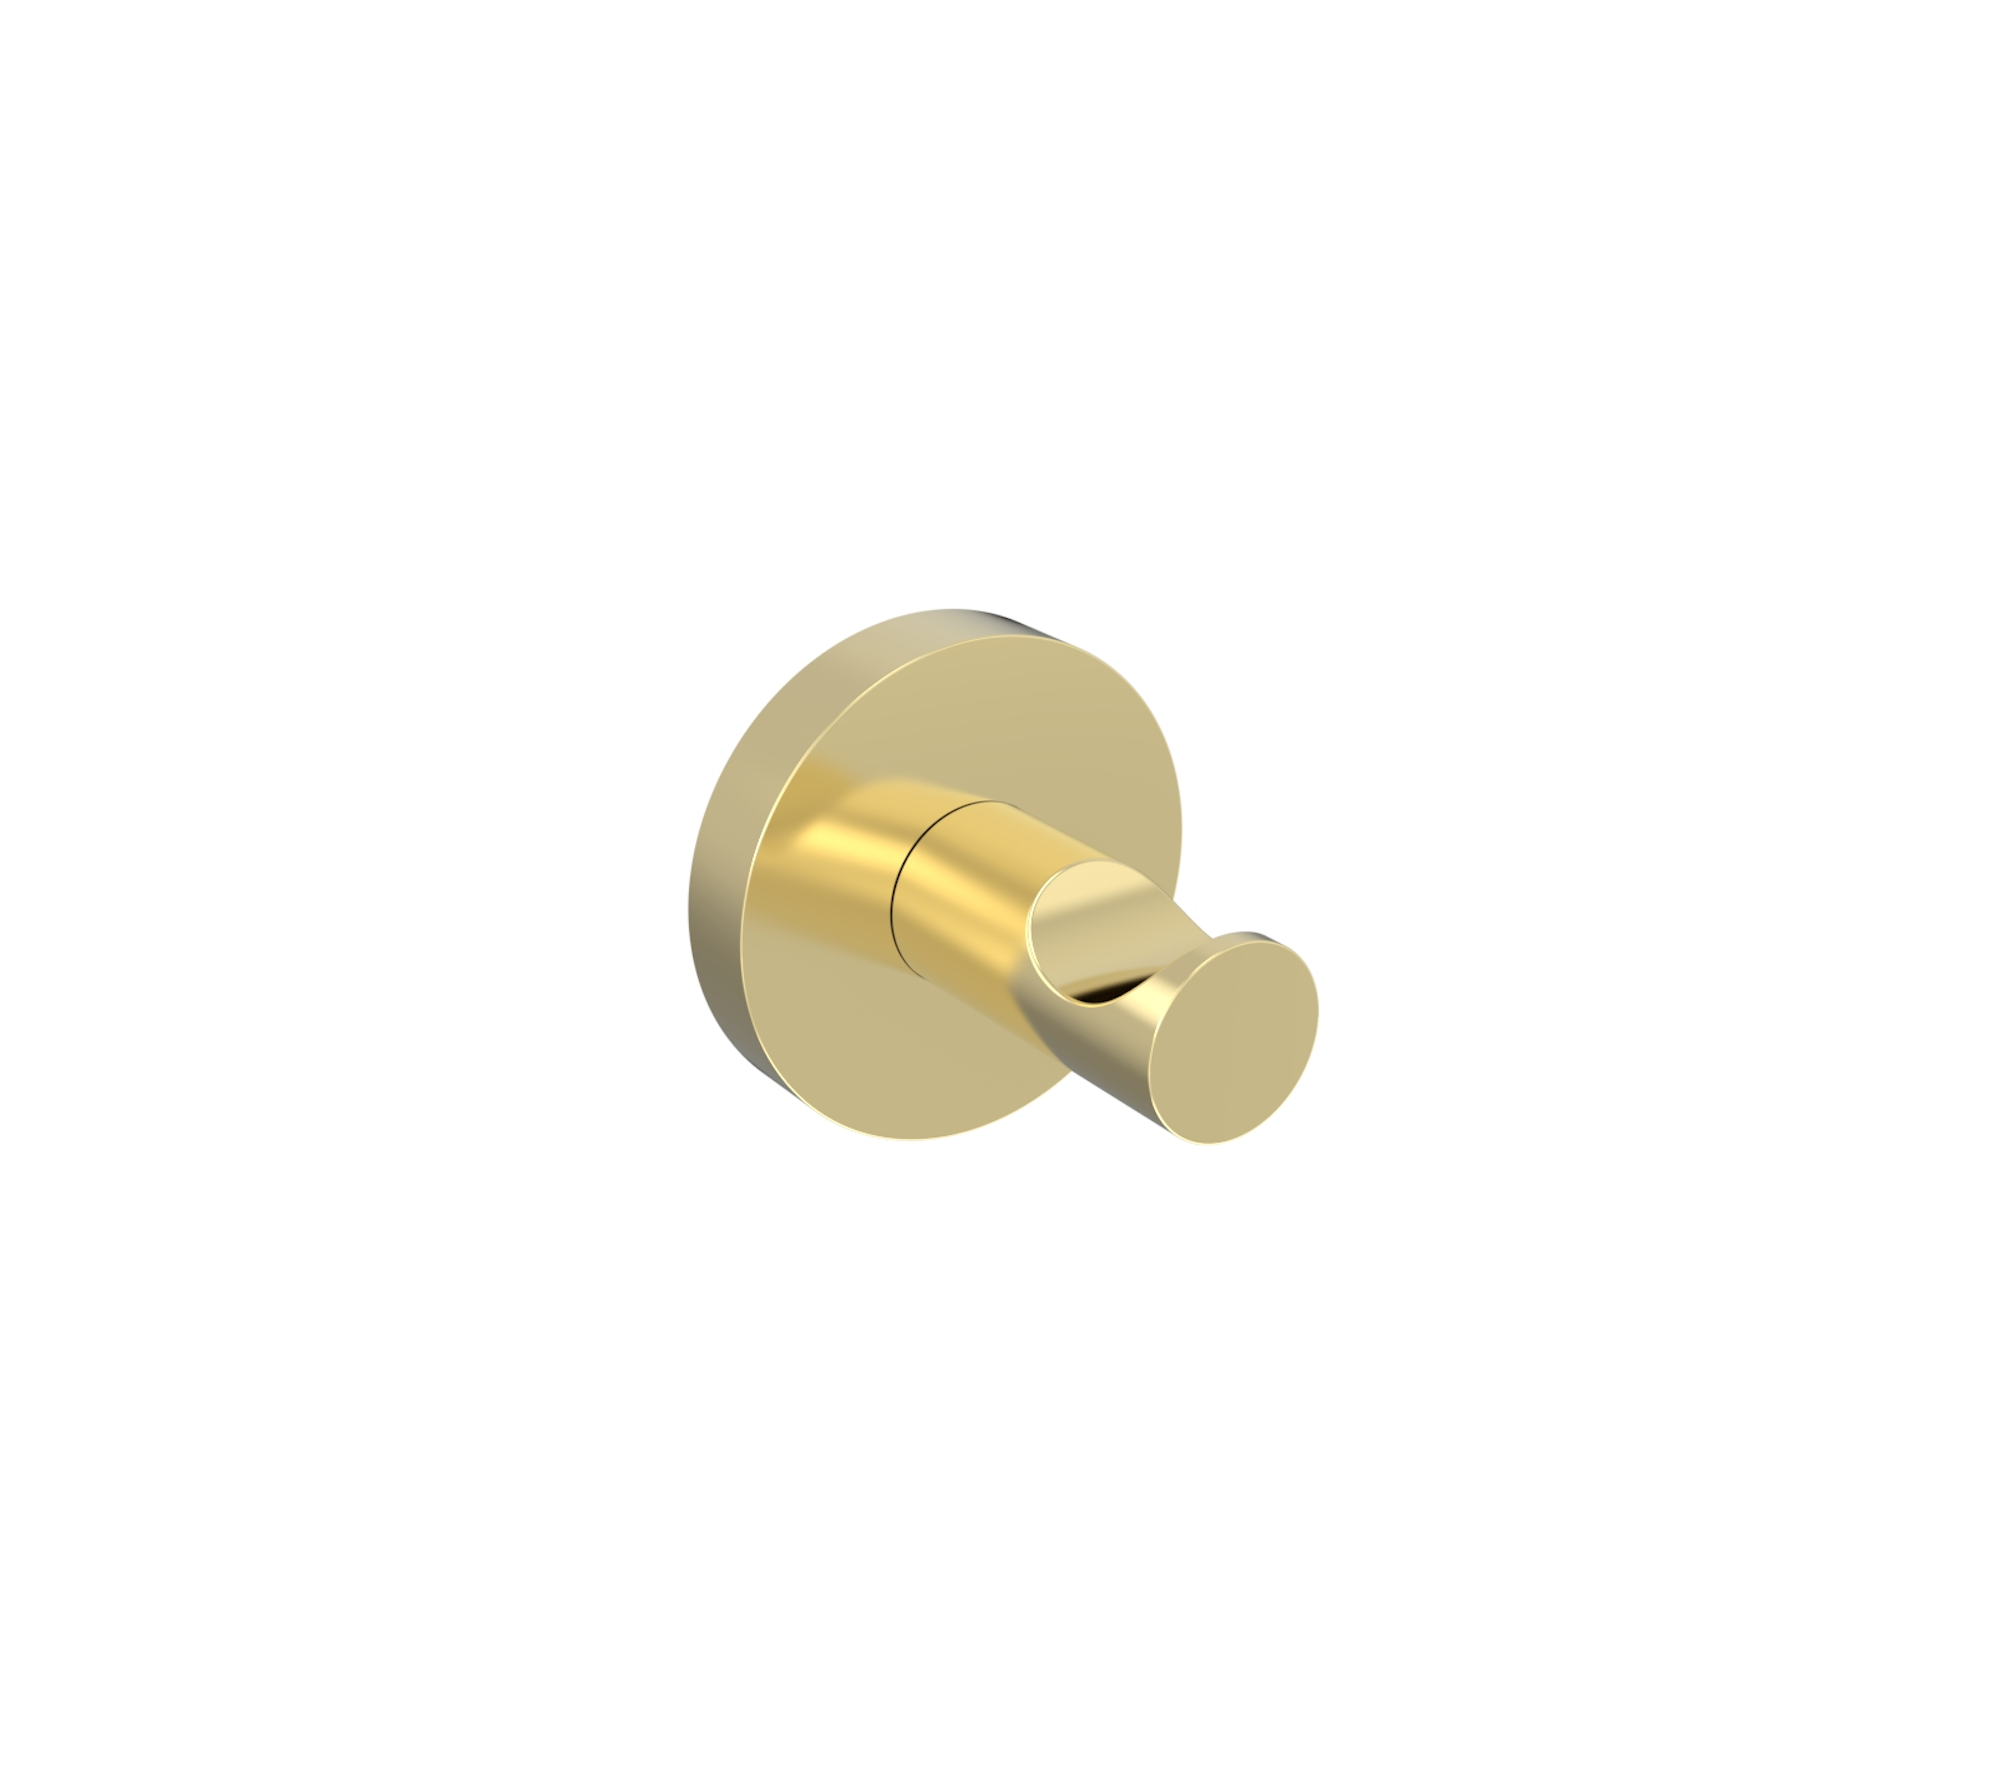 COS robe hook - Brushed Brass